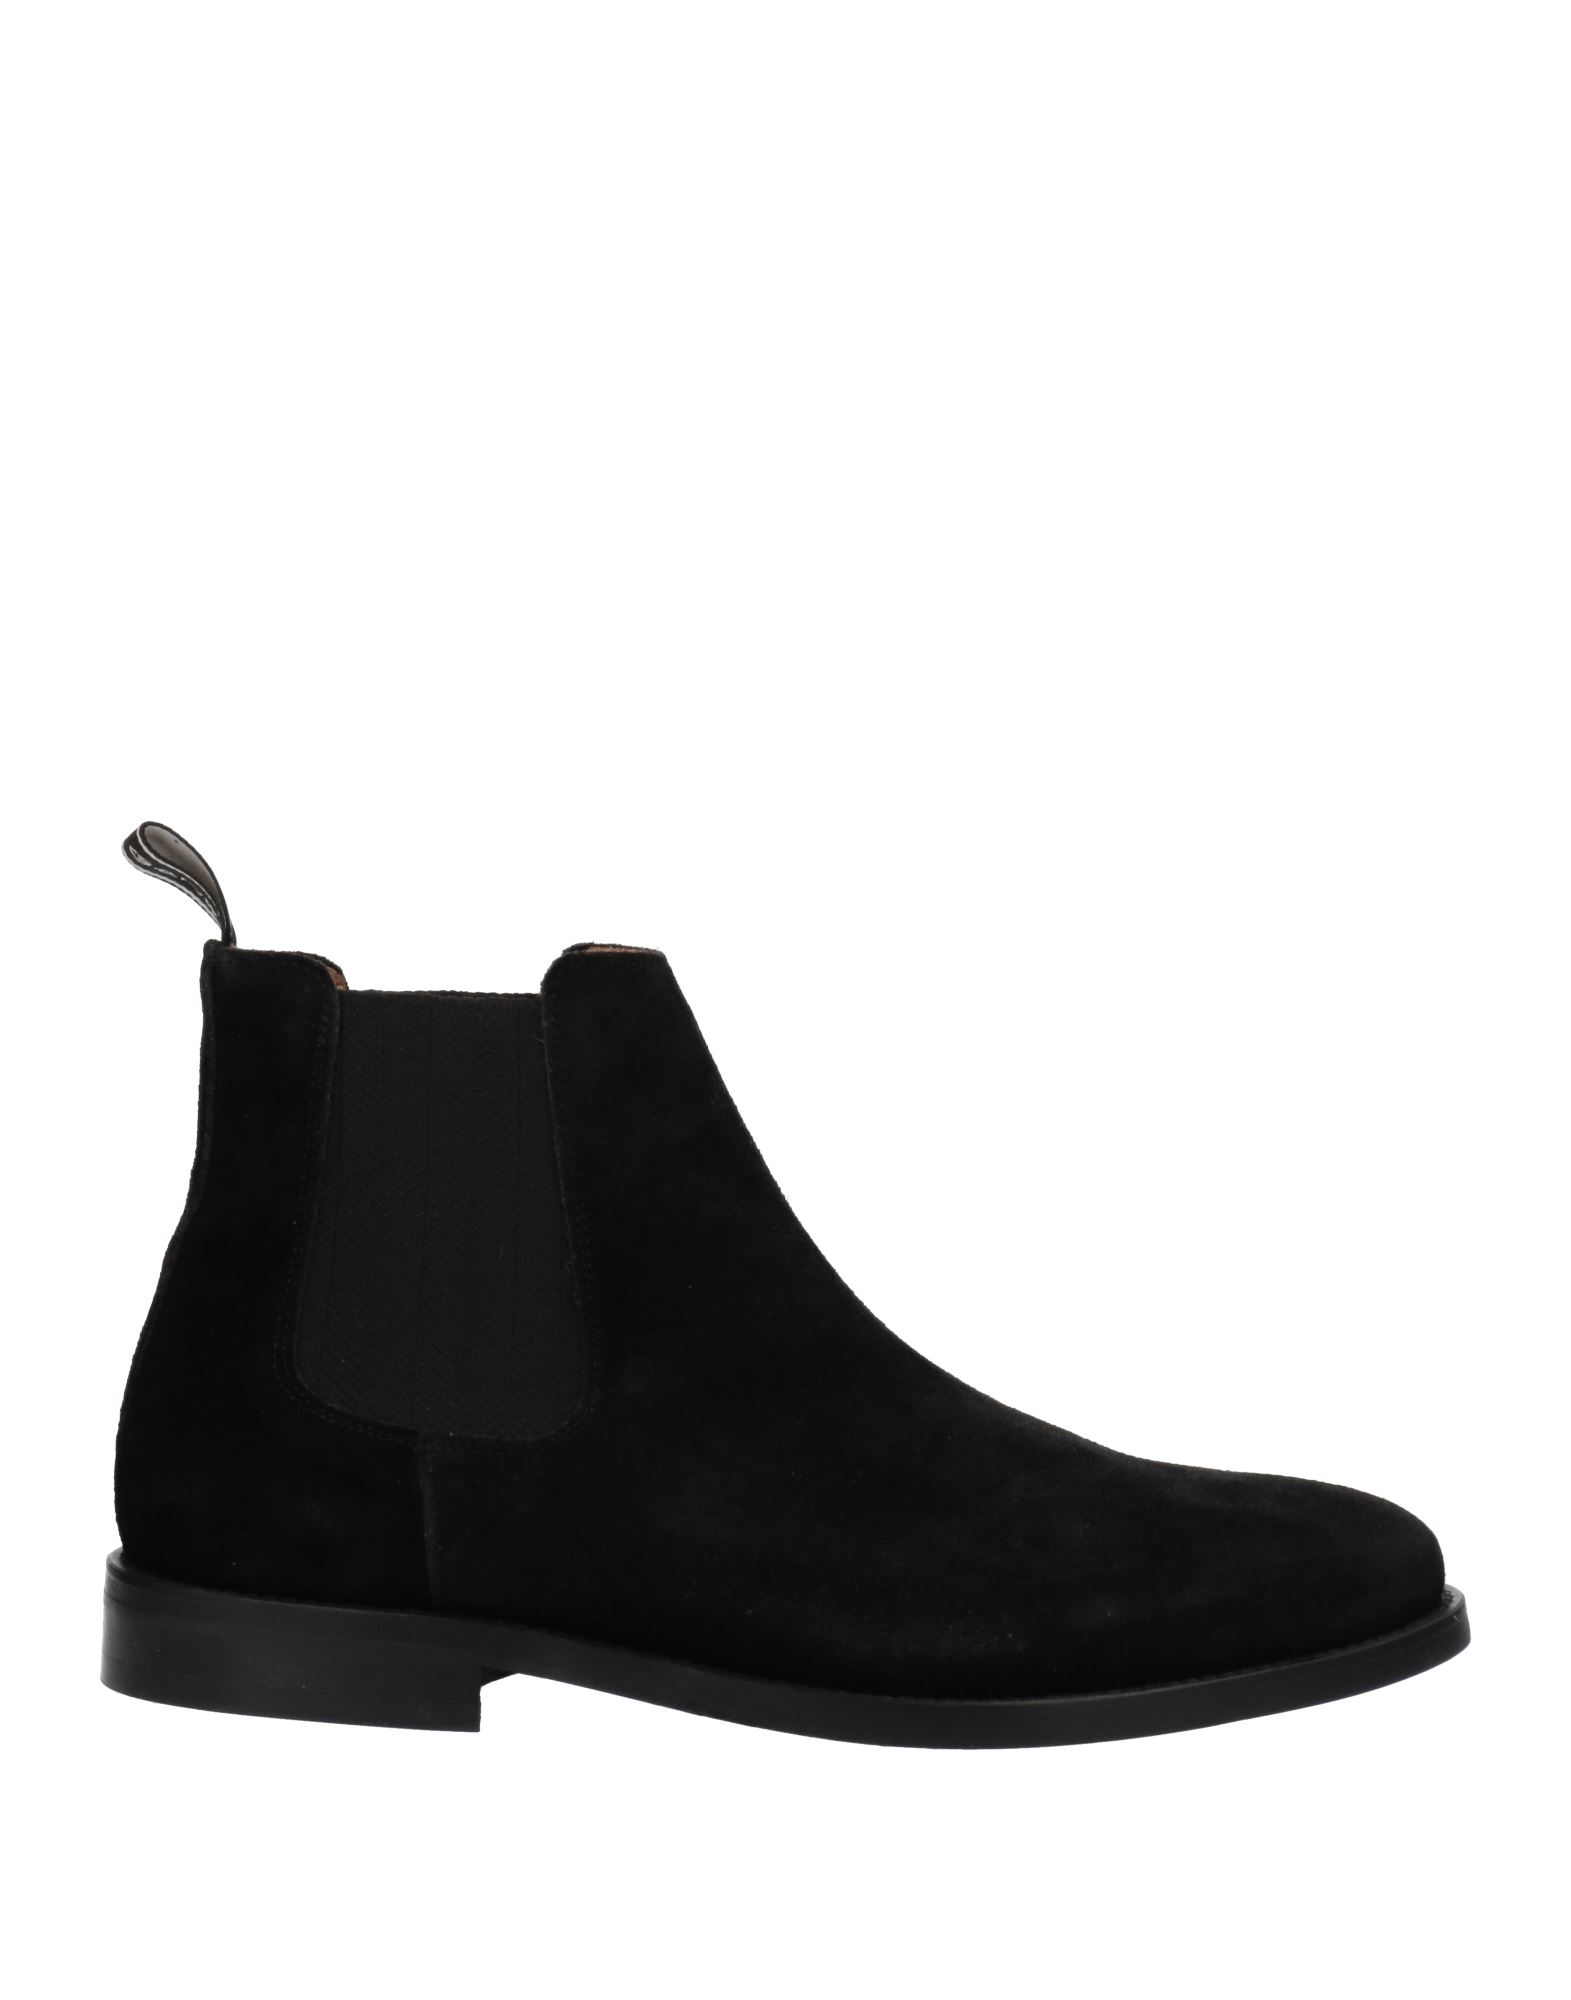 Gant Ankle Boots In Black